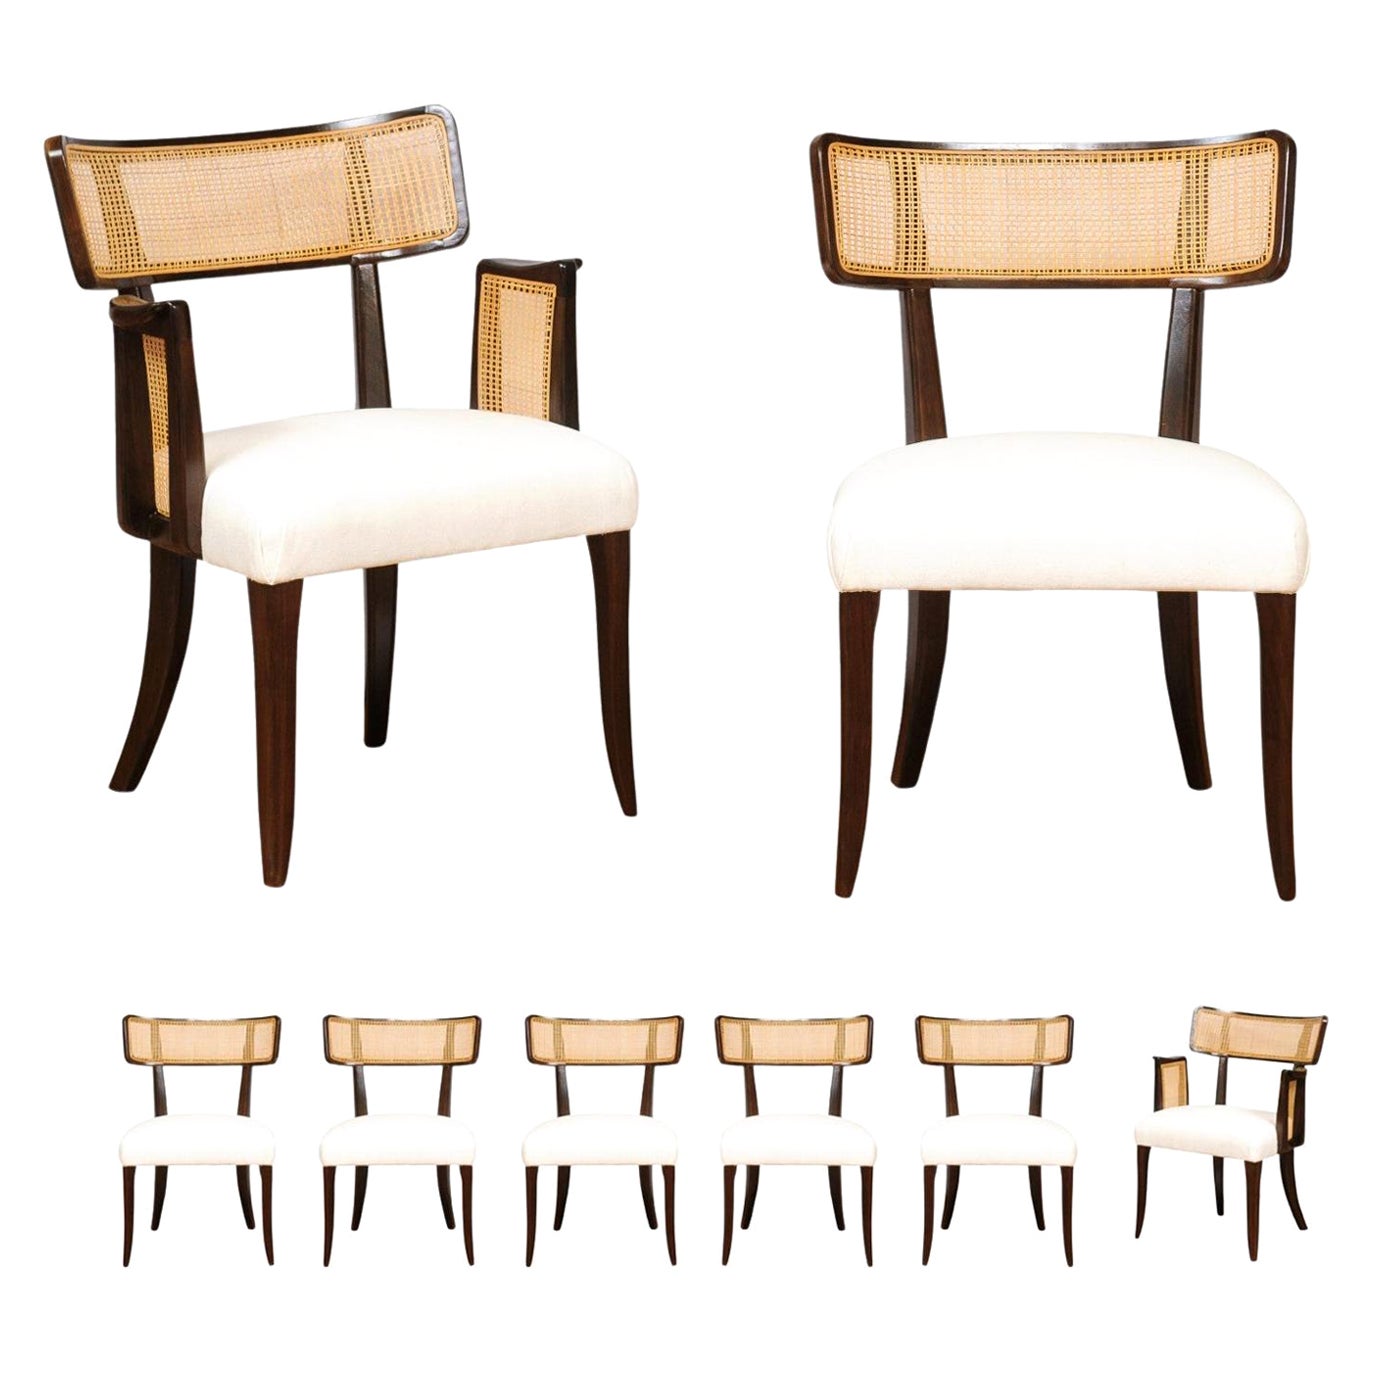 Gorgeous Restored Set of 8 Cane Dining Chairs by Wormley for Dunbar, circa 1948